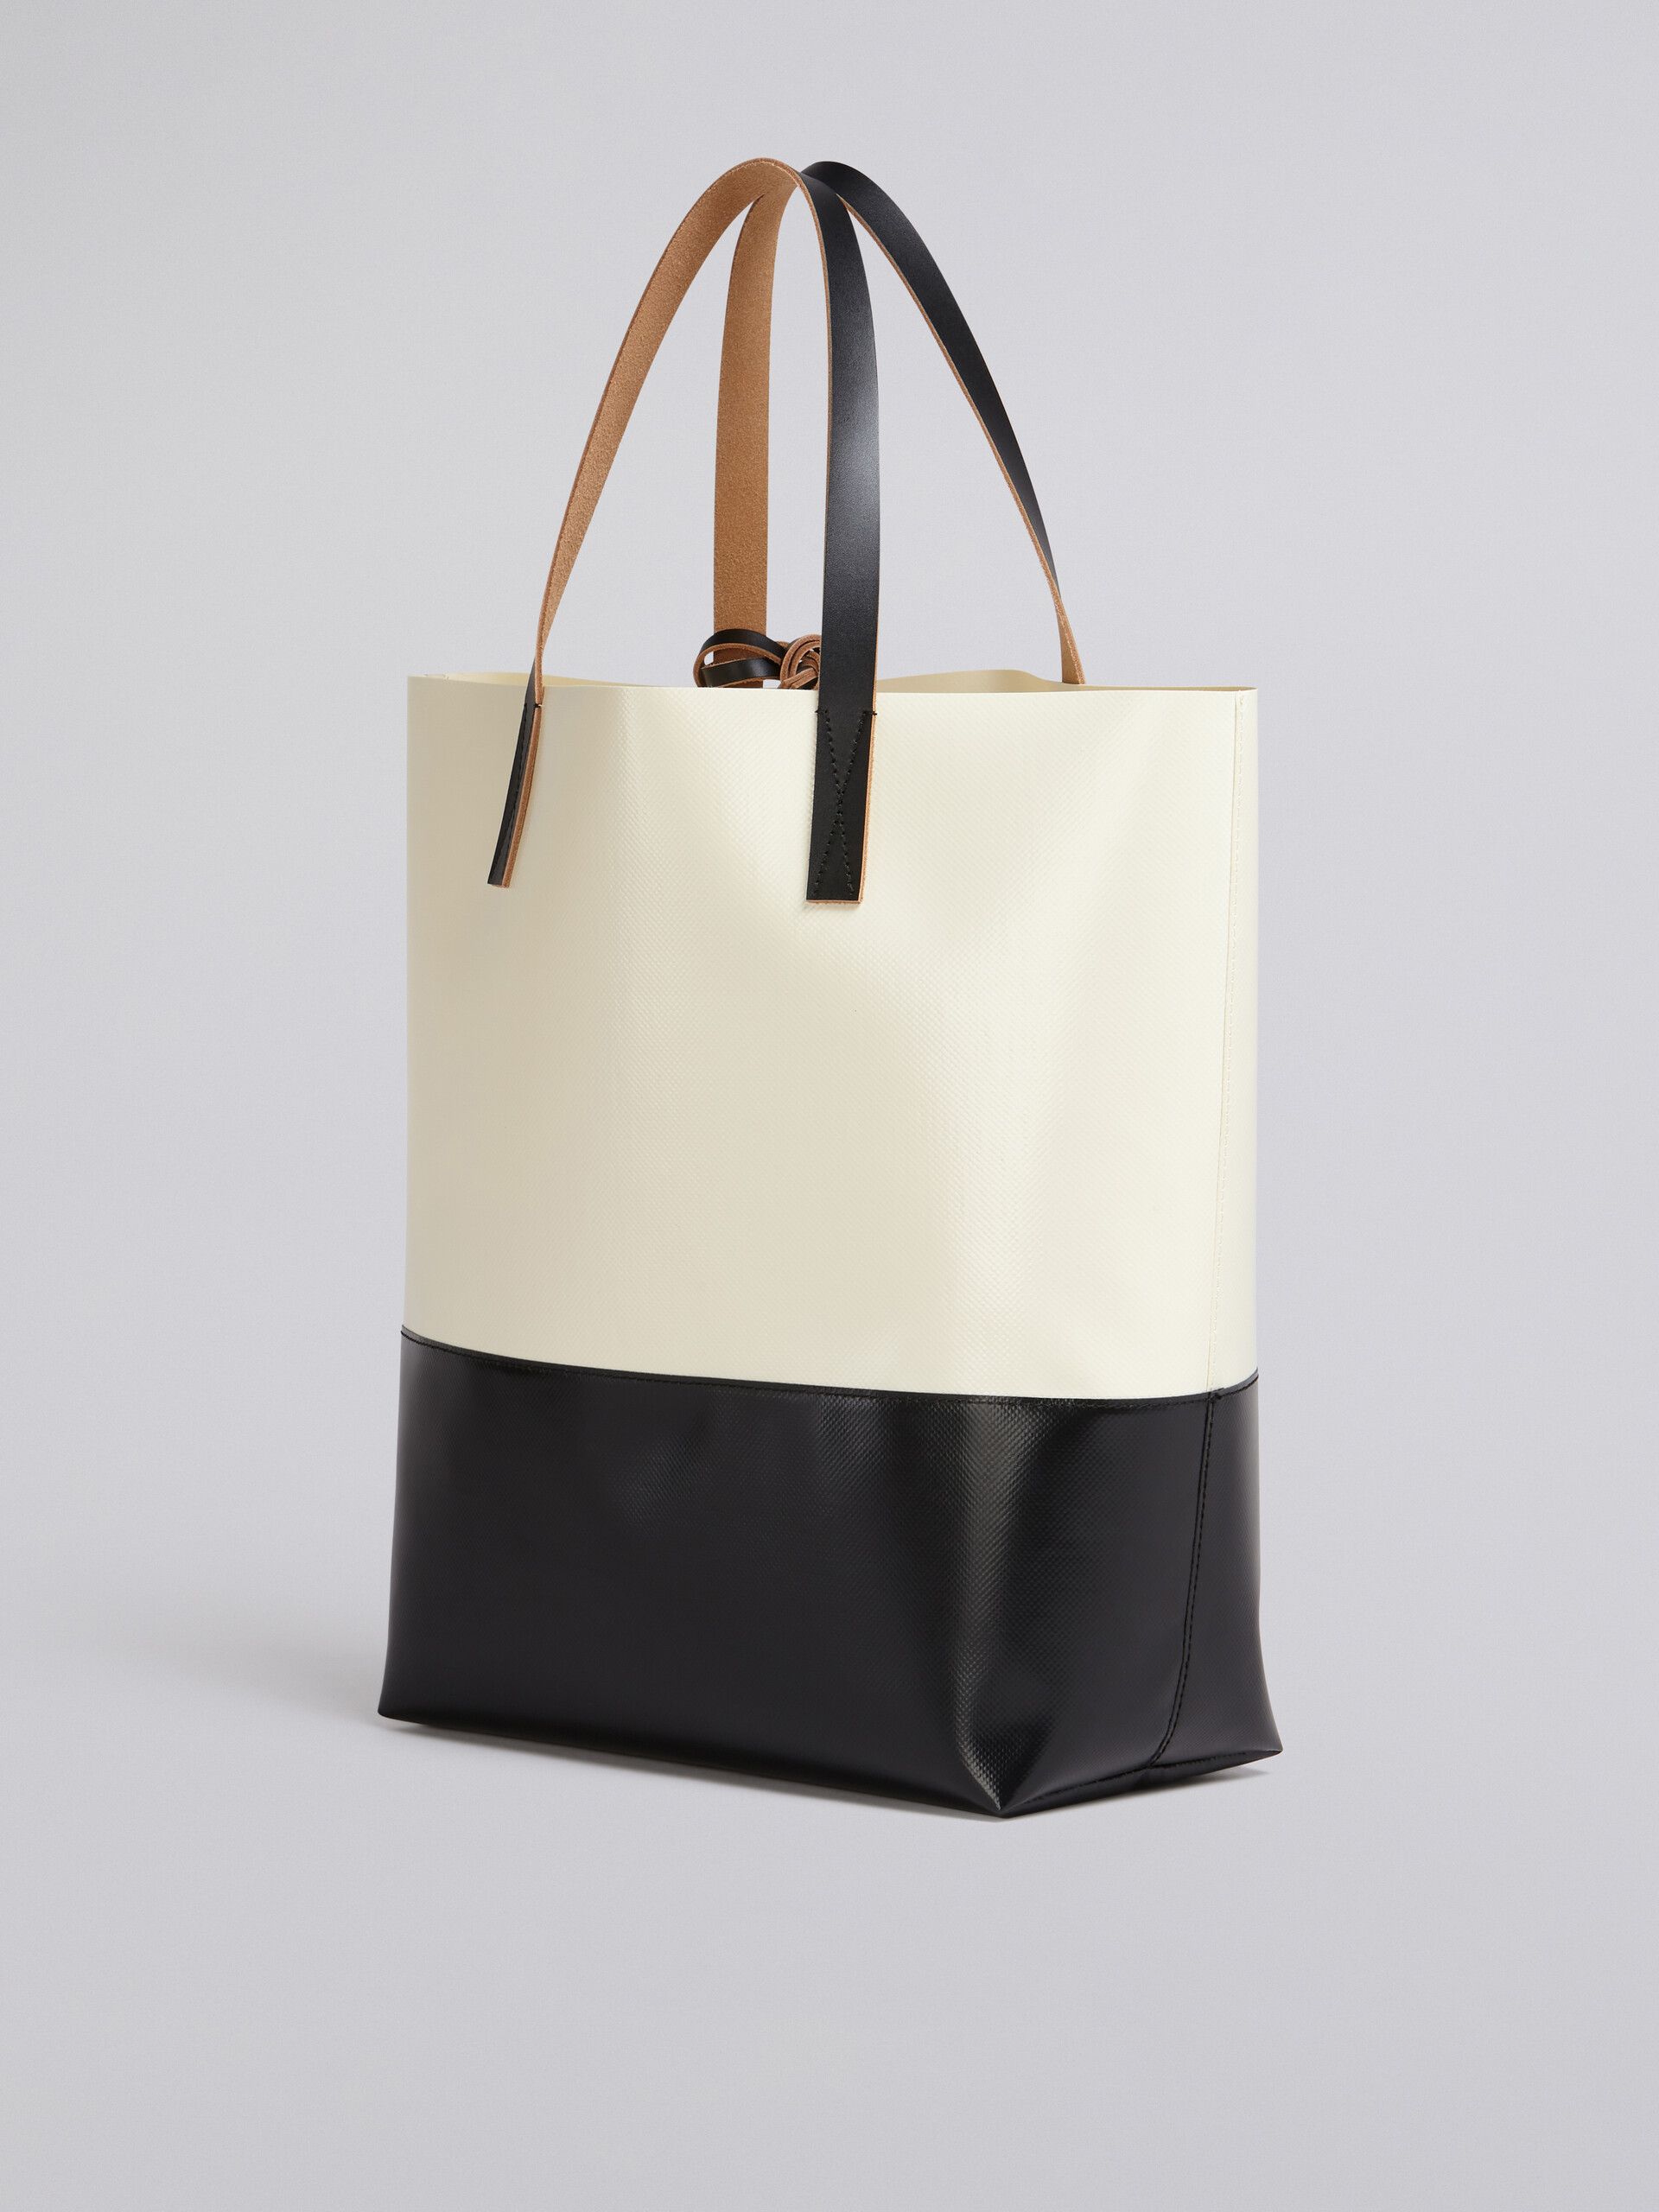 White and black TRIBECA shopping bag - Shopping Bags - Image 3